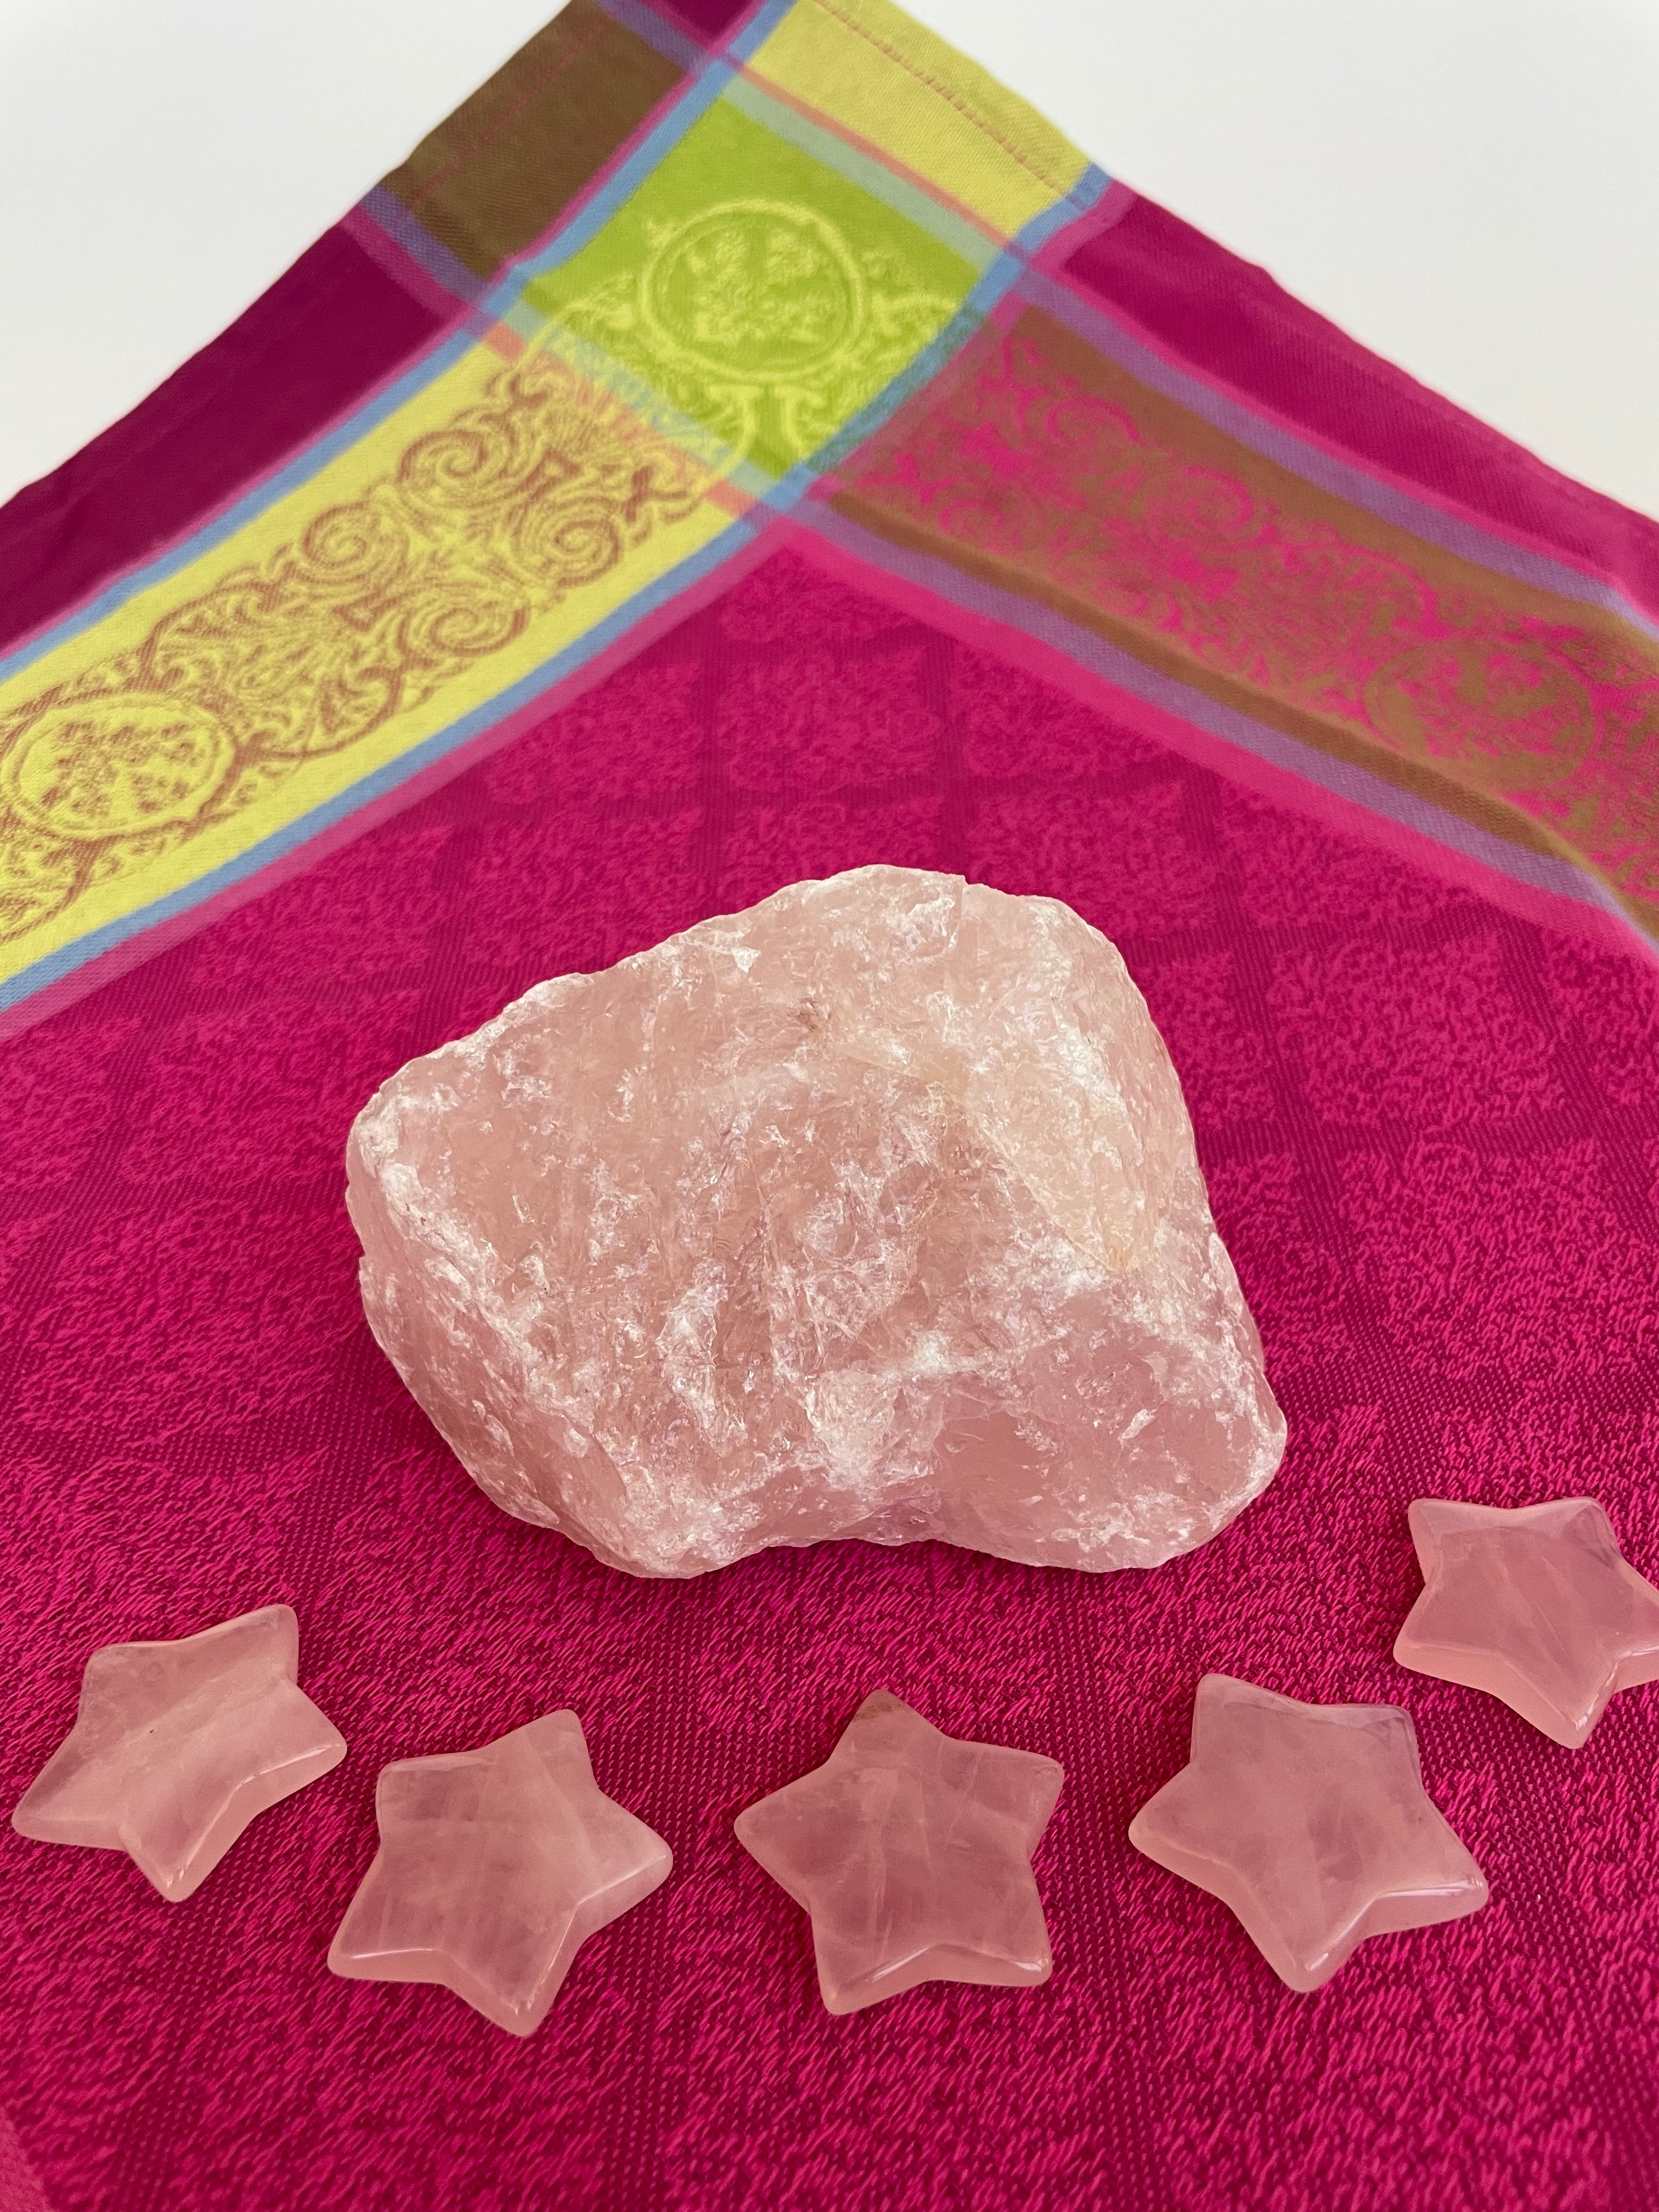 View of several rose quartz stars. This sweet little rose quartz crystal star can be used for meditation, healing, as an altar piece or as décor for any room in your home or office. Makes a wonderful gift too! Easy to slip right into your pocket so you can take the energy of rose quartz wherever you go! Rose quartz is the "stone of unconditional love & infinite peace." (Judy Hall). Approx. 1¼". Cost is $6.